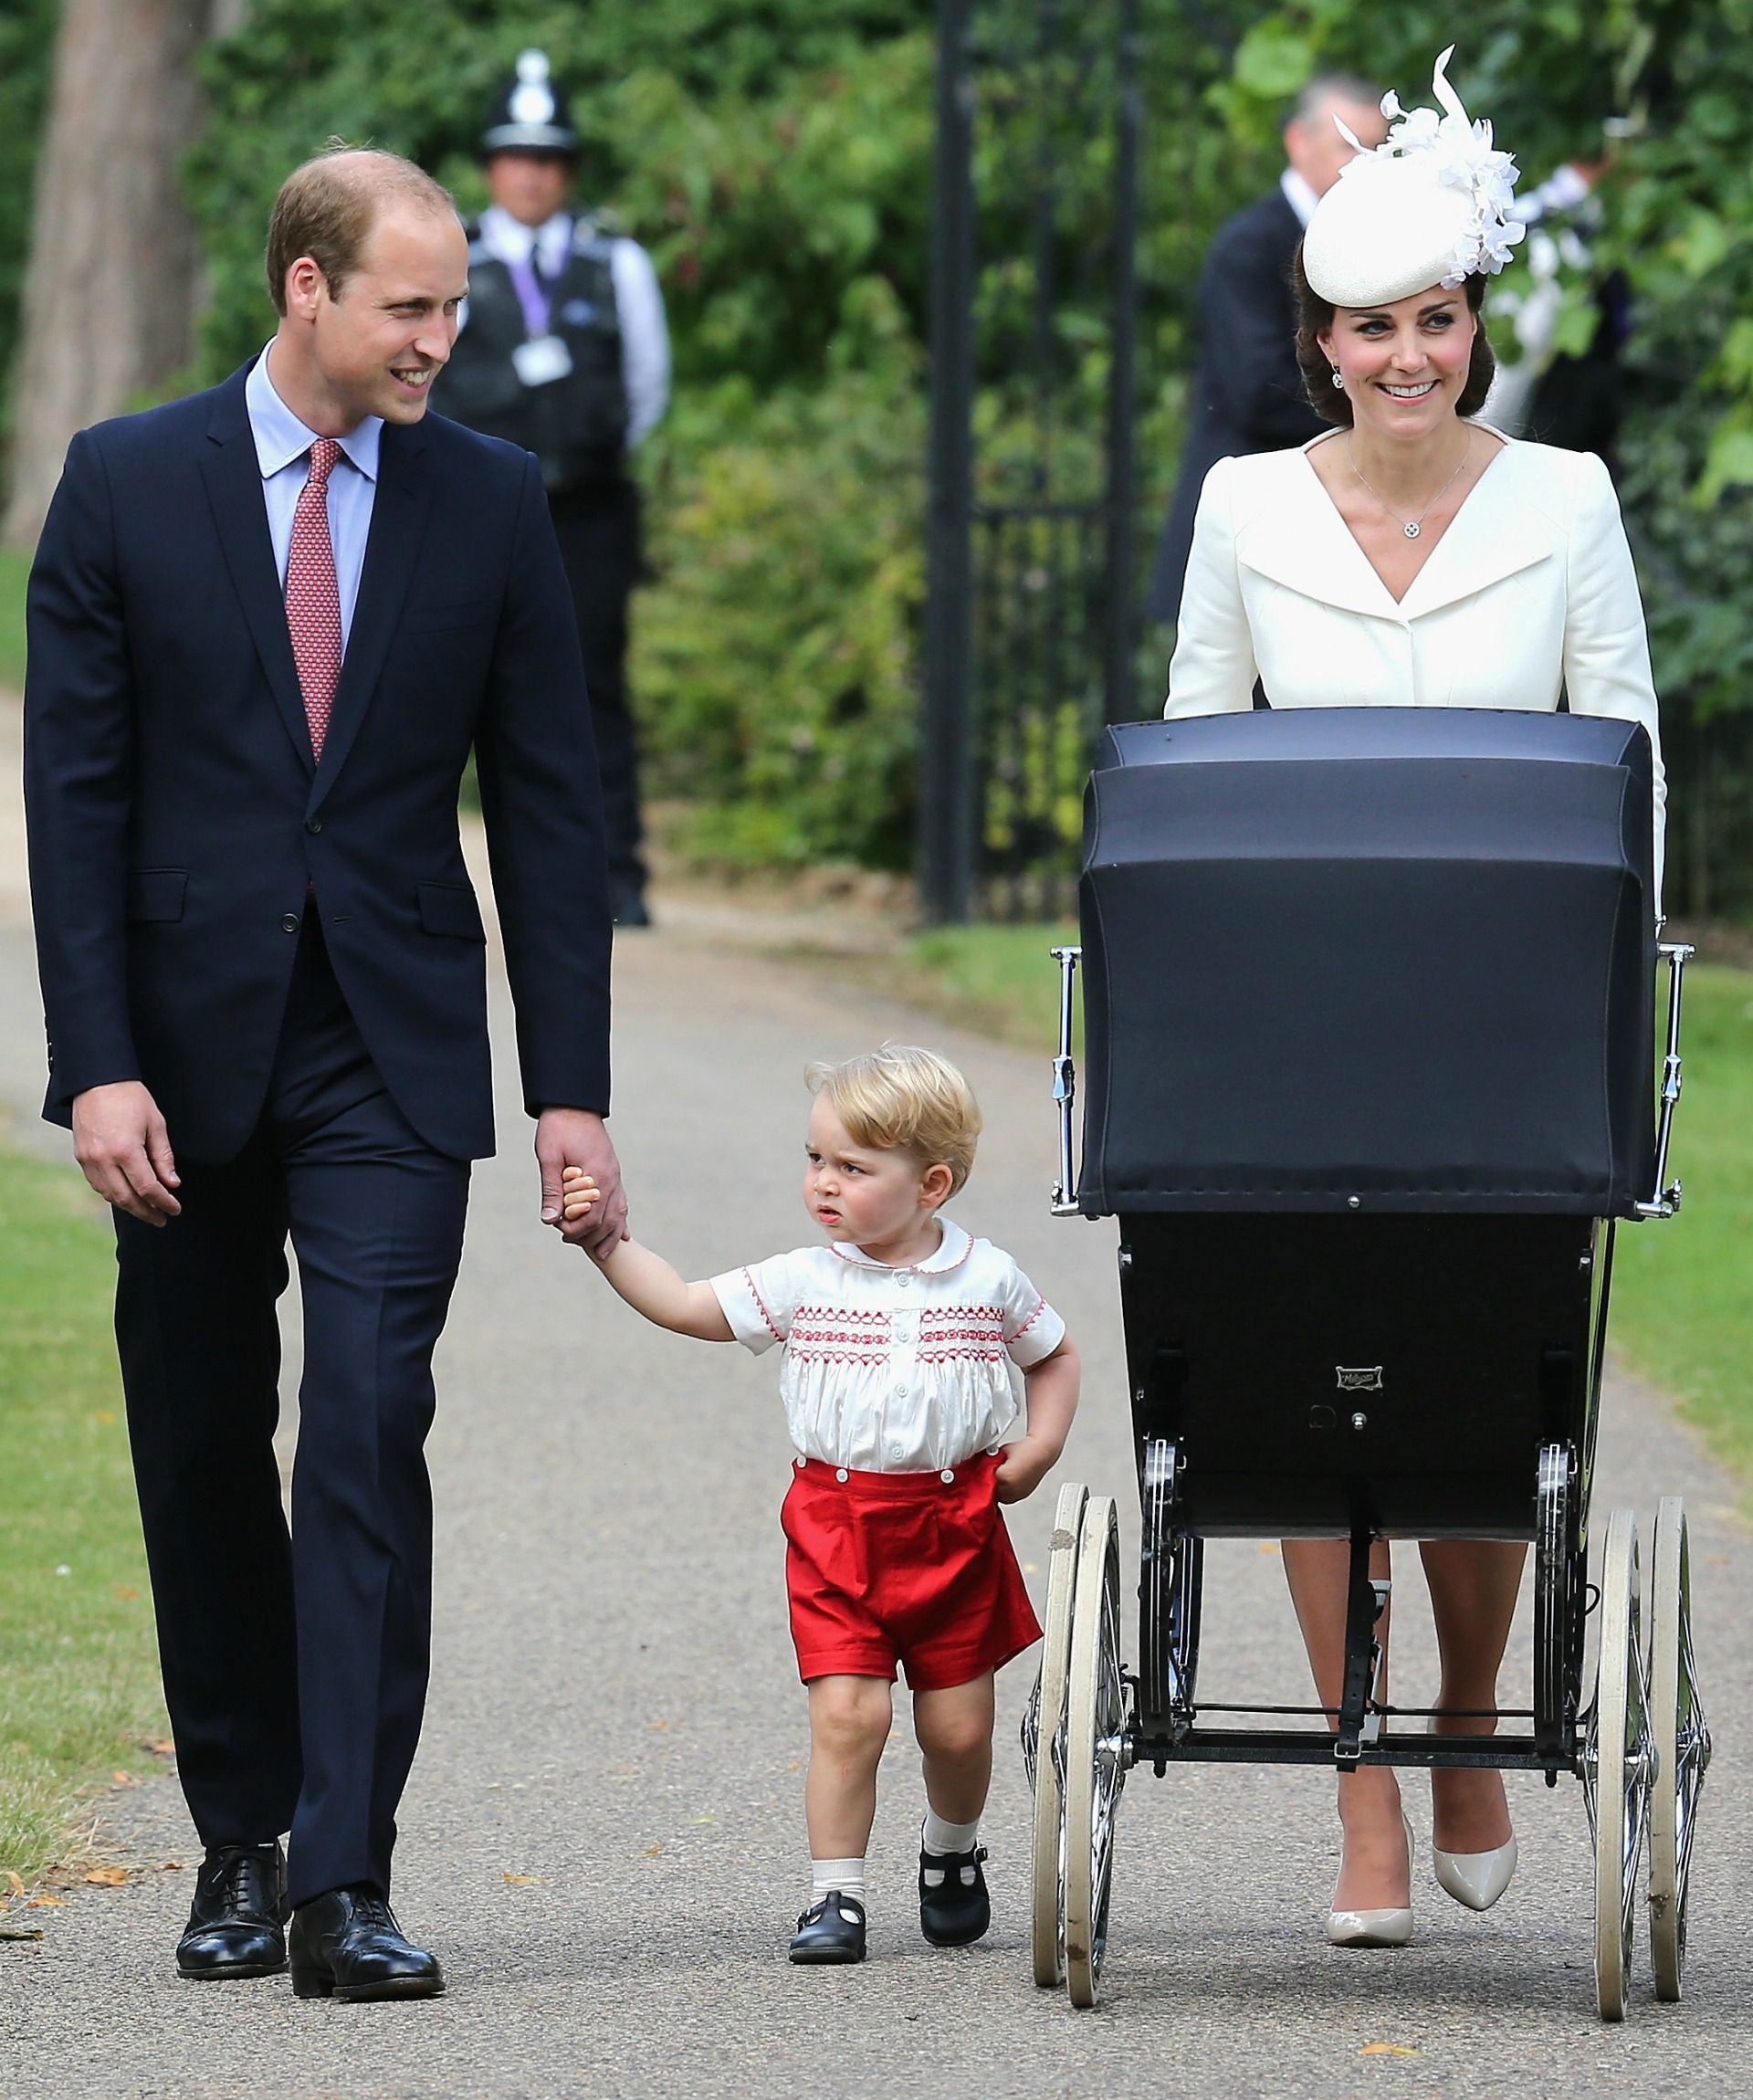 In pictures: Princess Charlotte christening